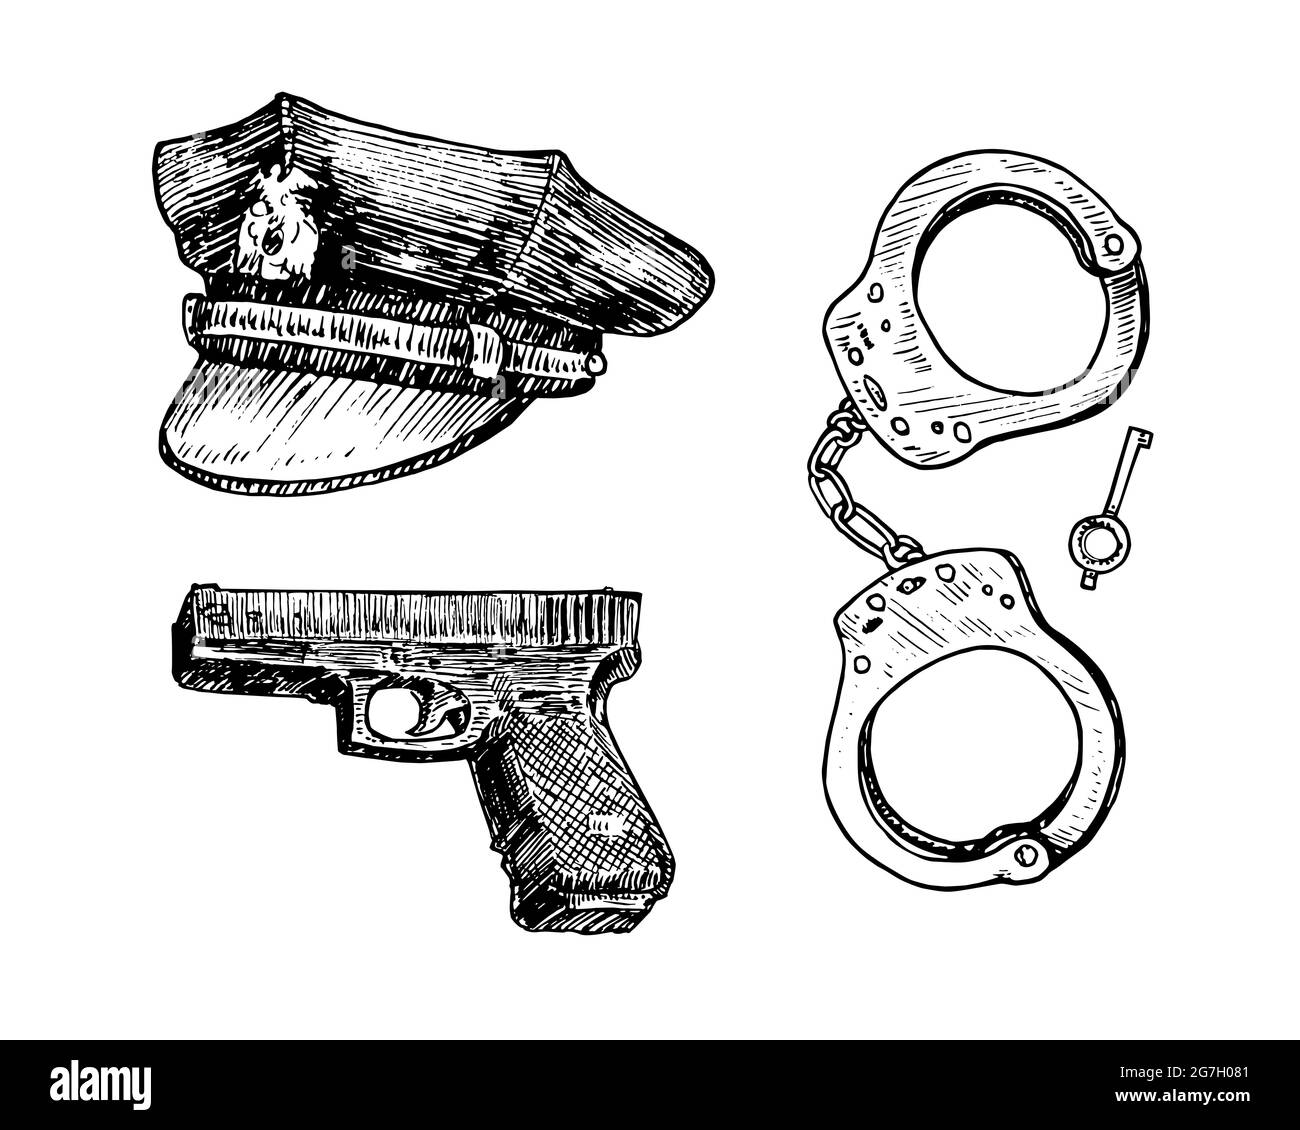 Vintage US American police officer 8 point visor hat, Glock 22, Handcuffs and key,  gravure style ink drawing illustration isolated on white Stock Photo